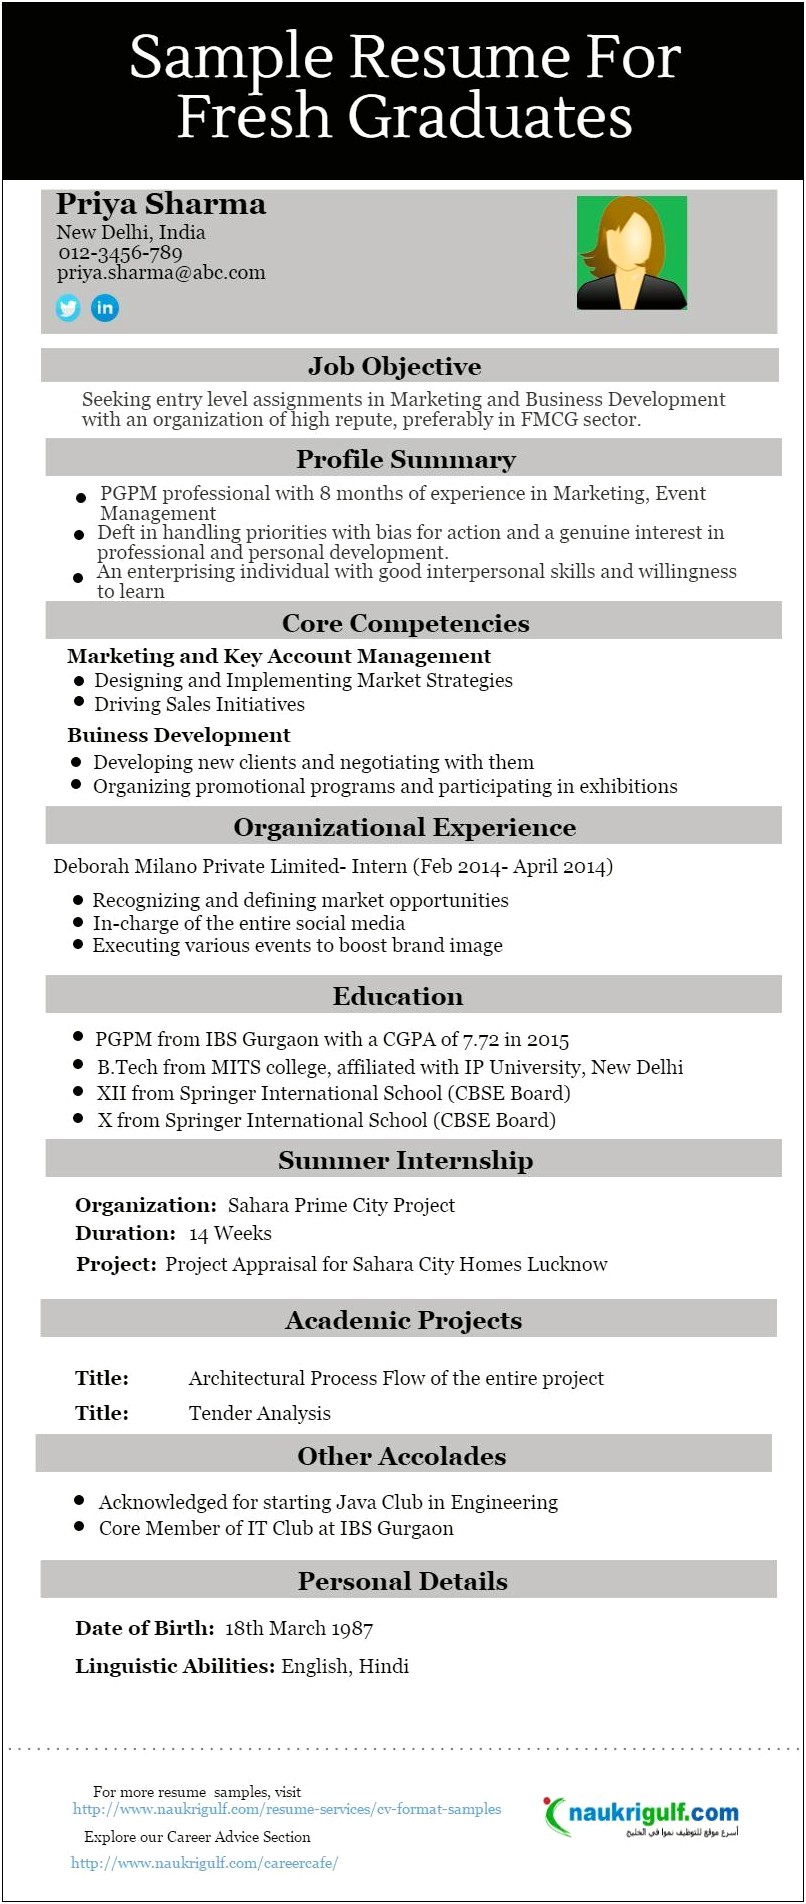 Resume Format For Job Interview For Freshers Campus